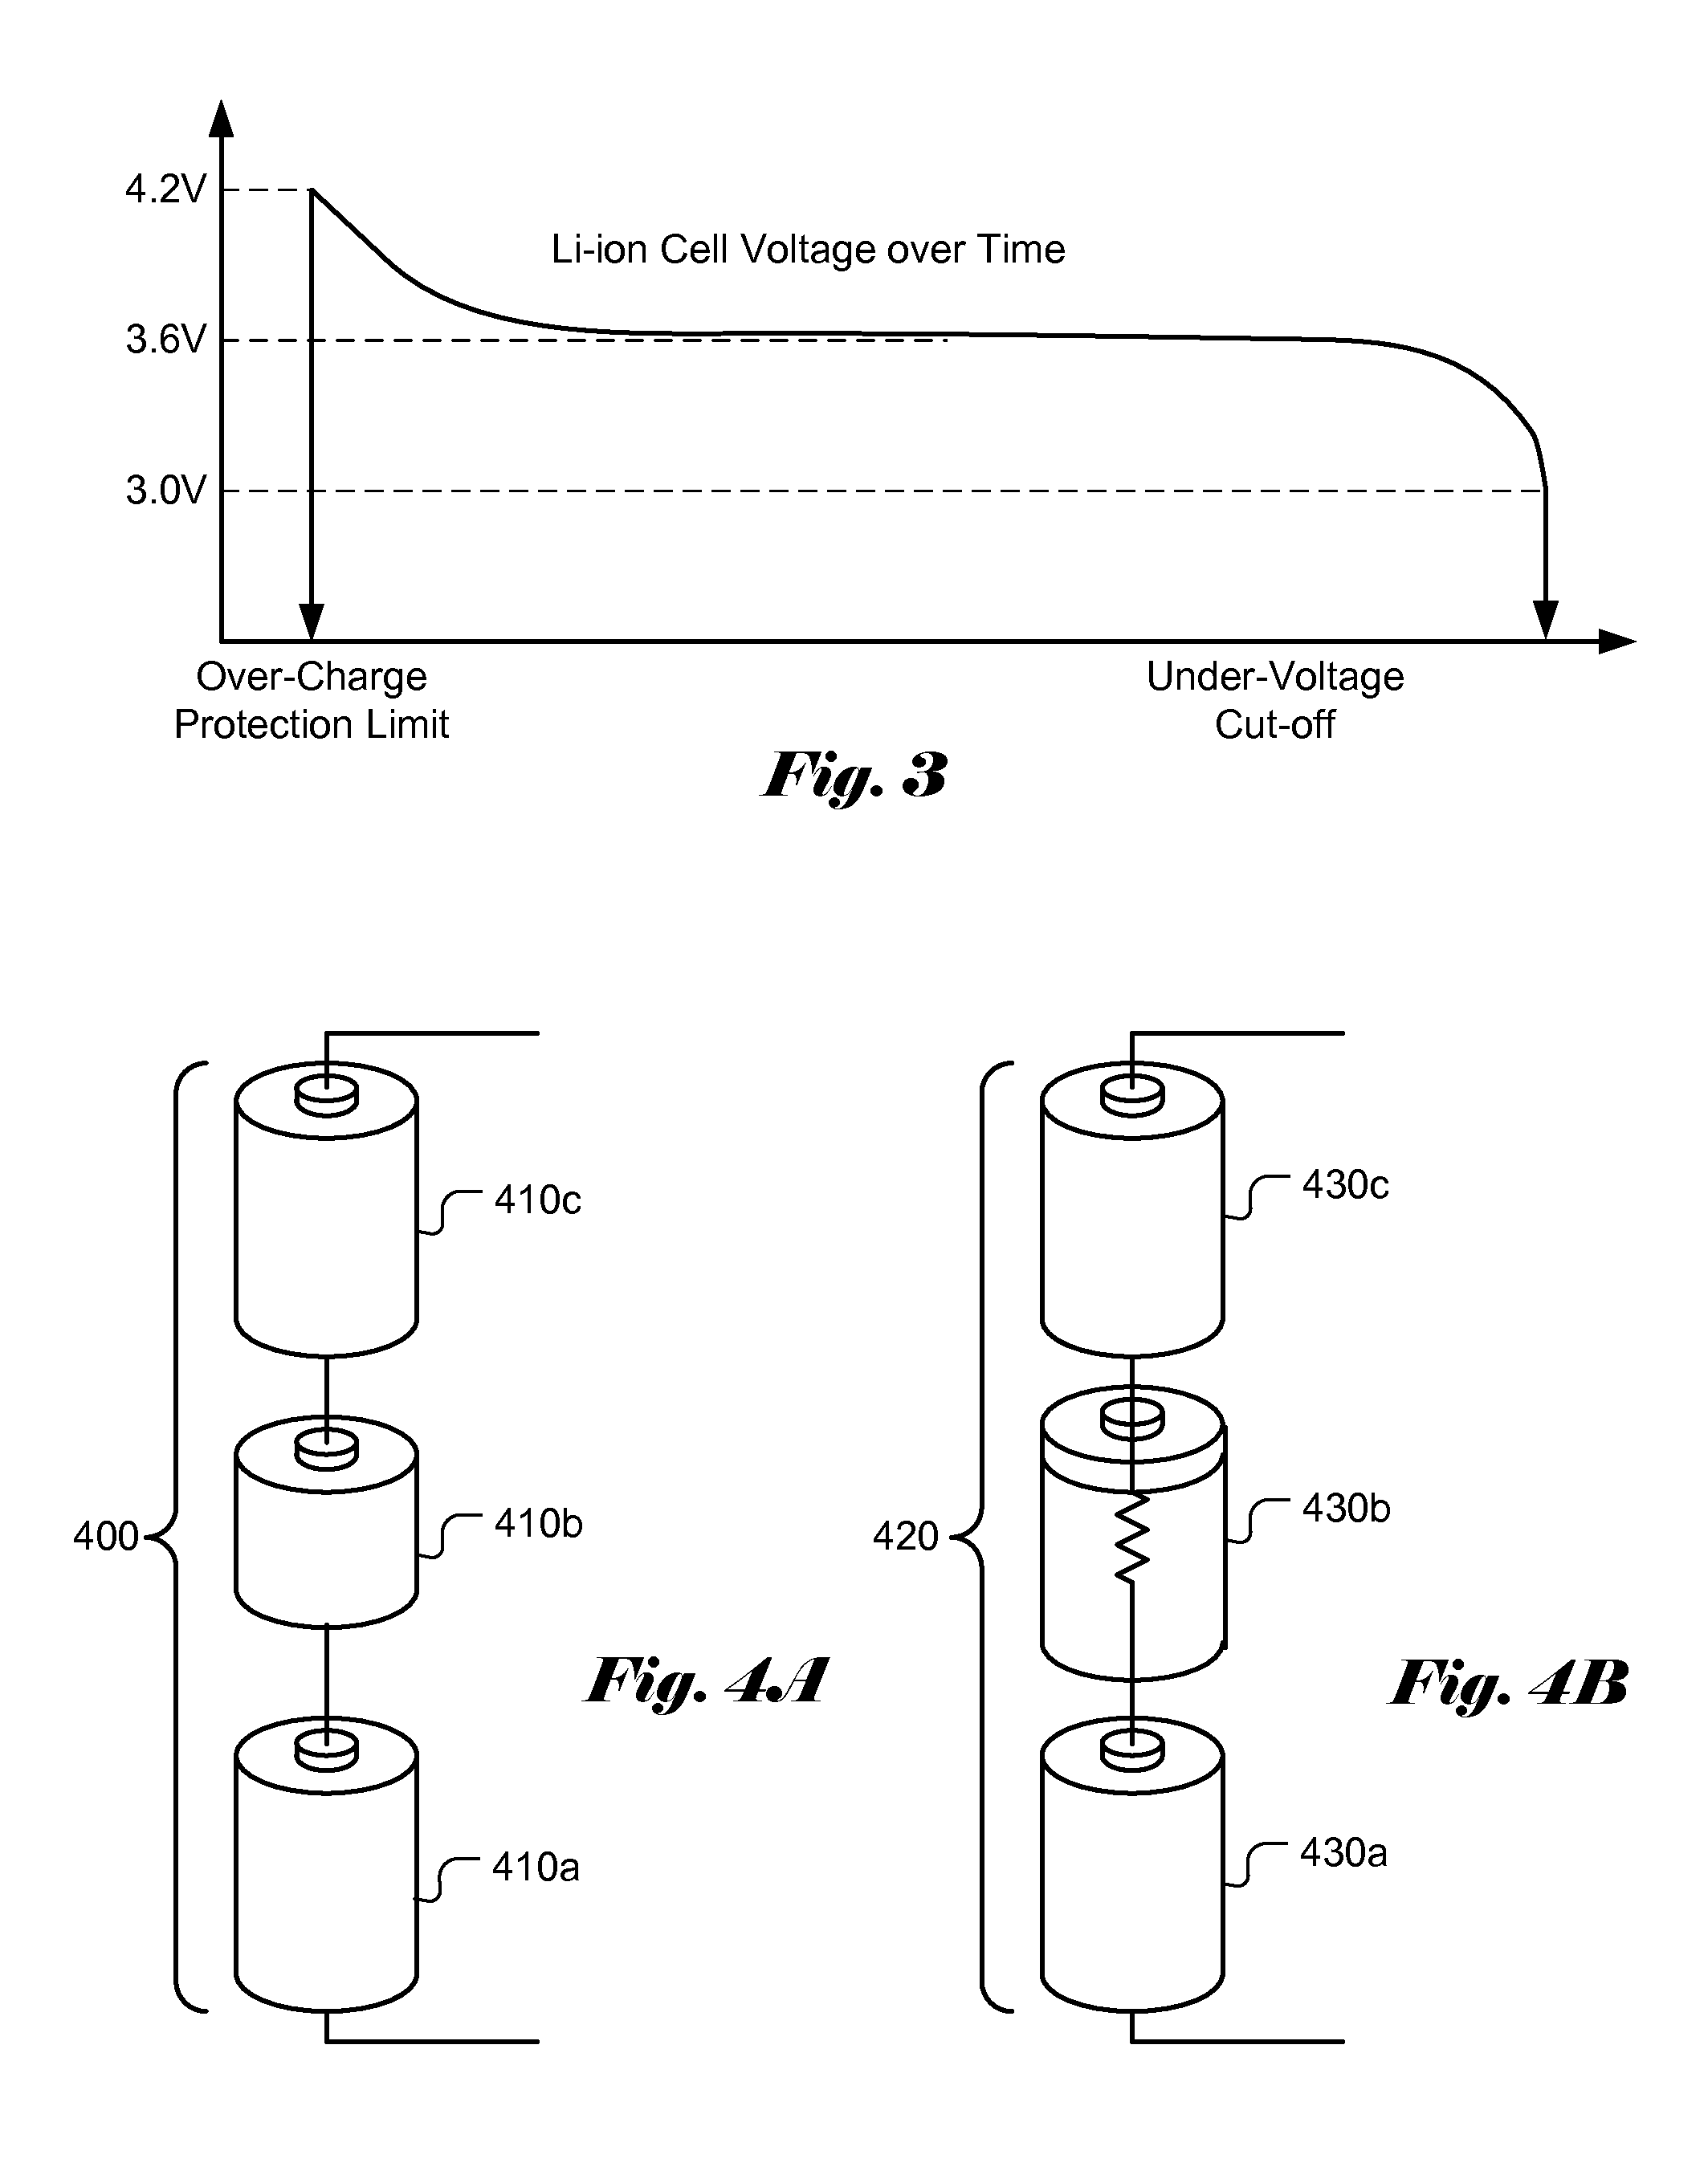 Battery-cell converter systems